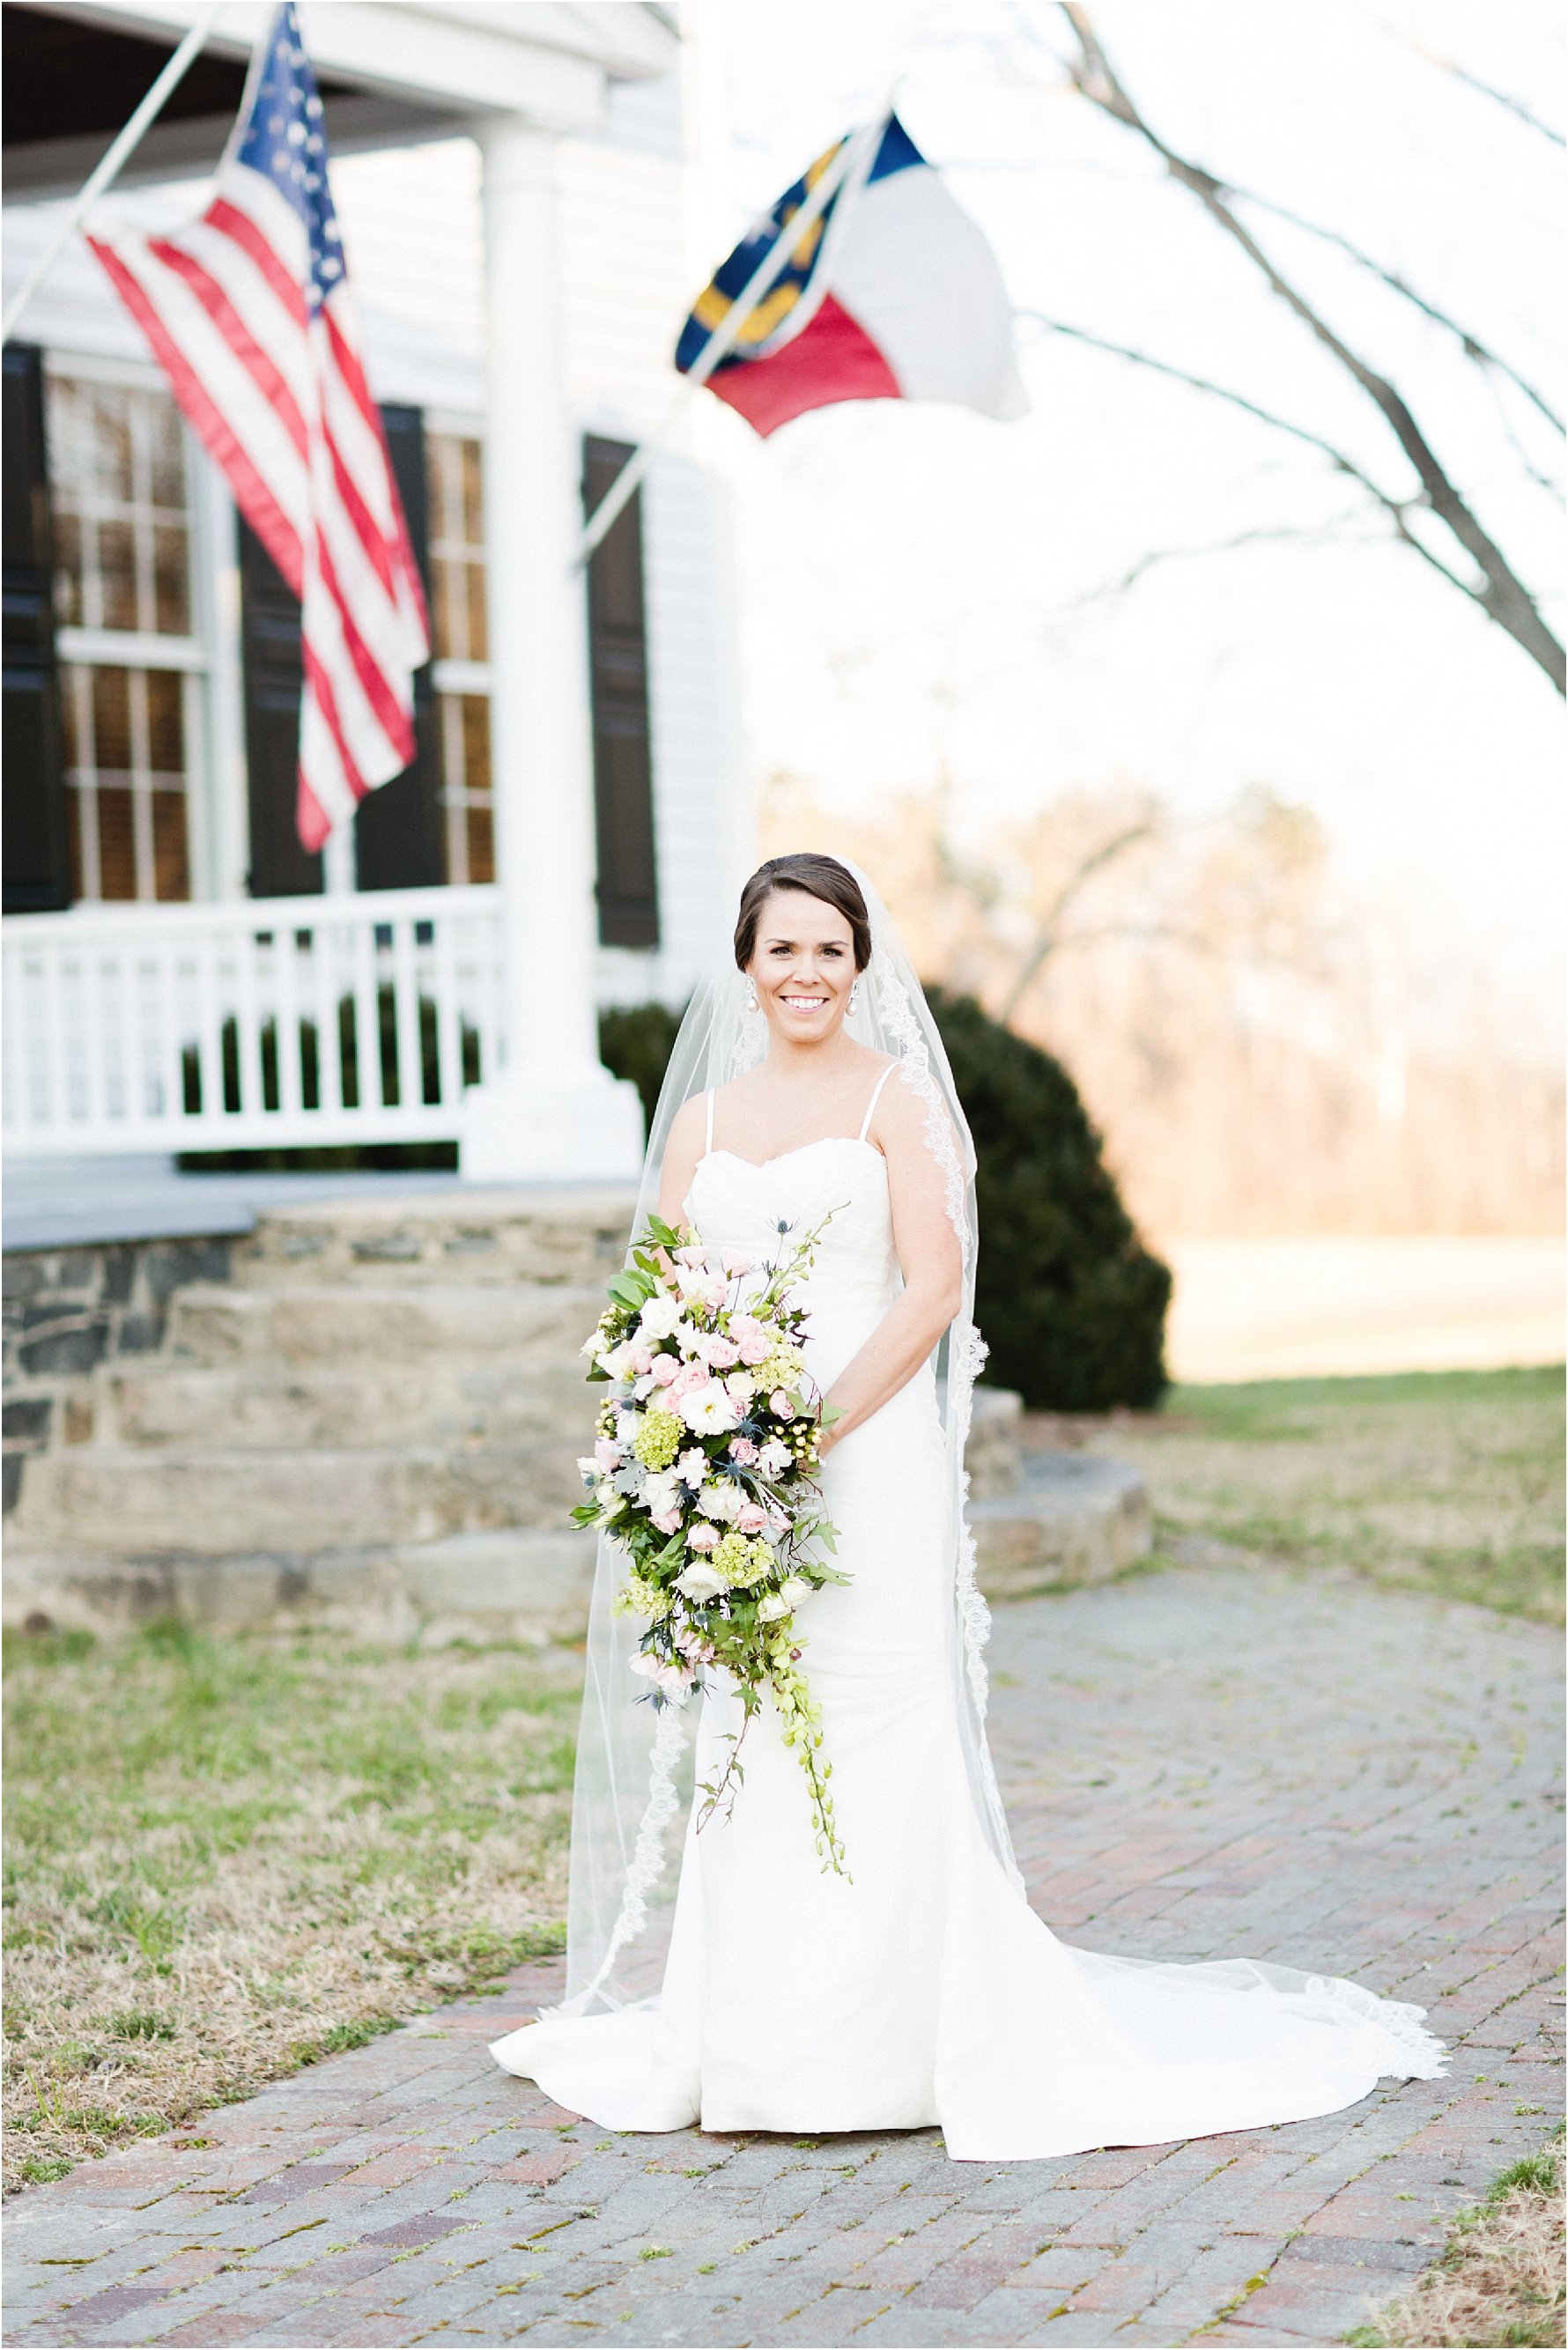 Classic Cathedral Veil Bridal Portraits in NC